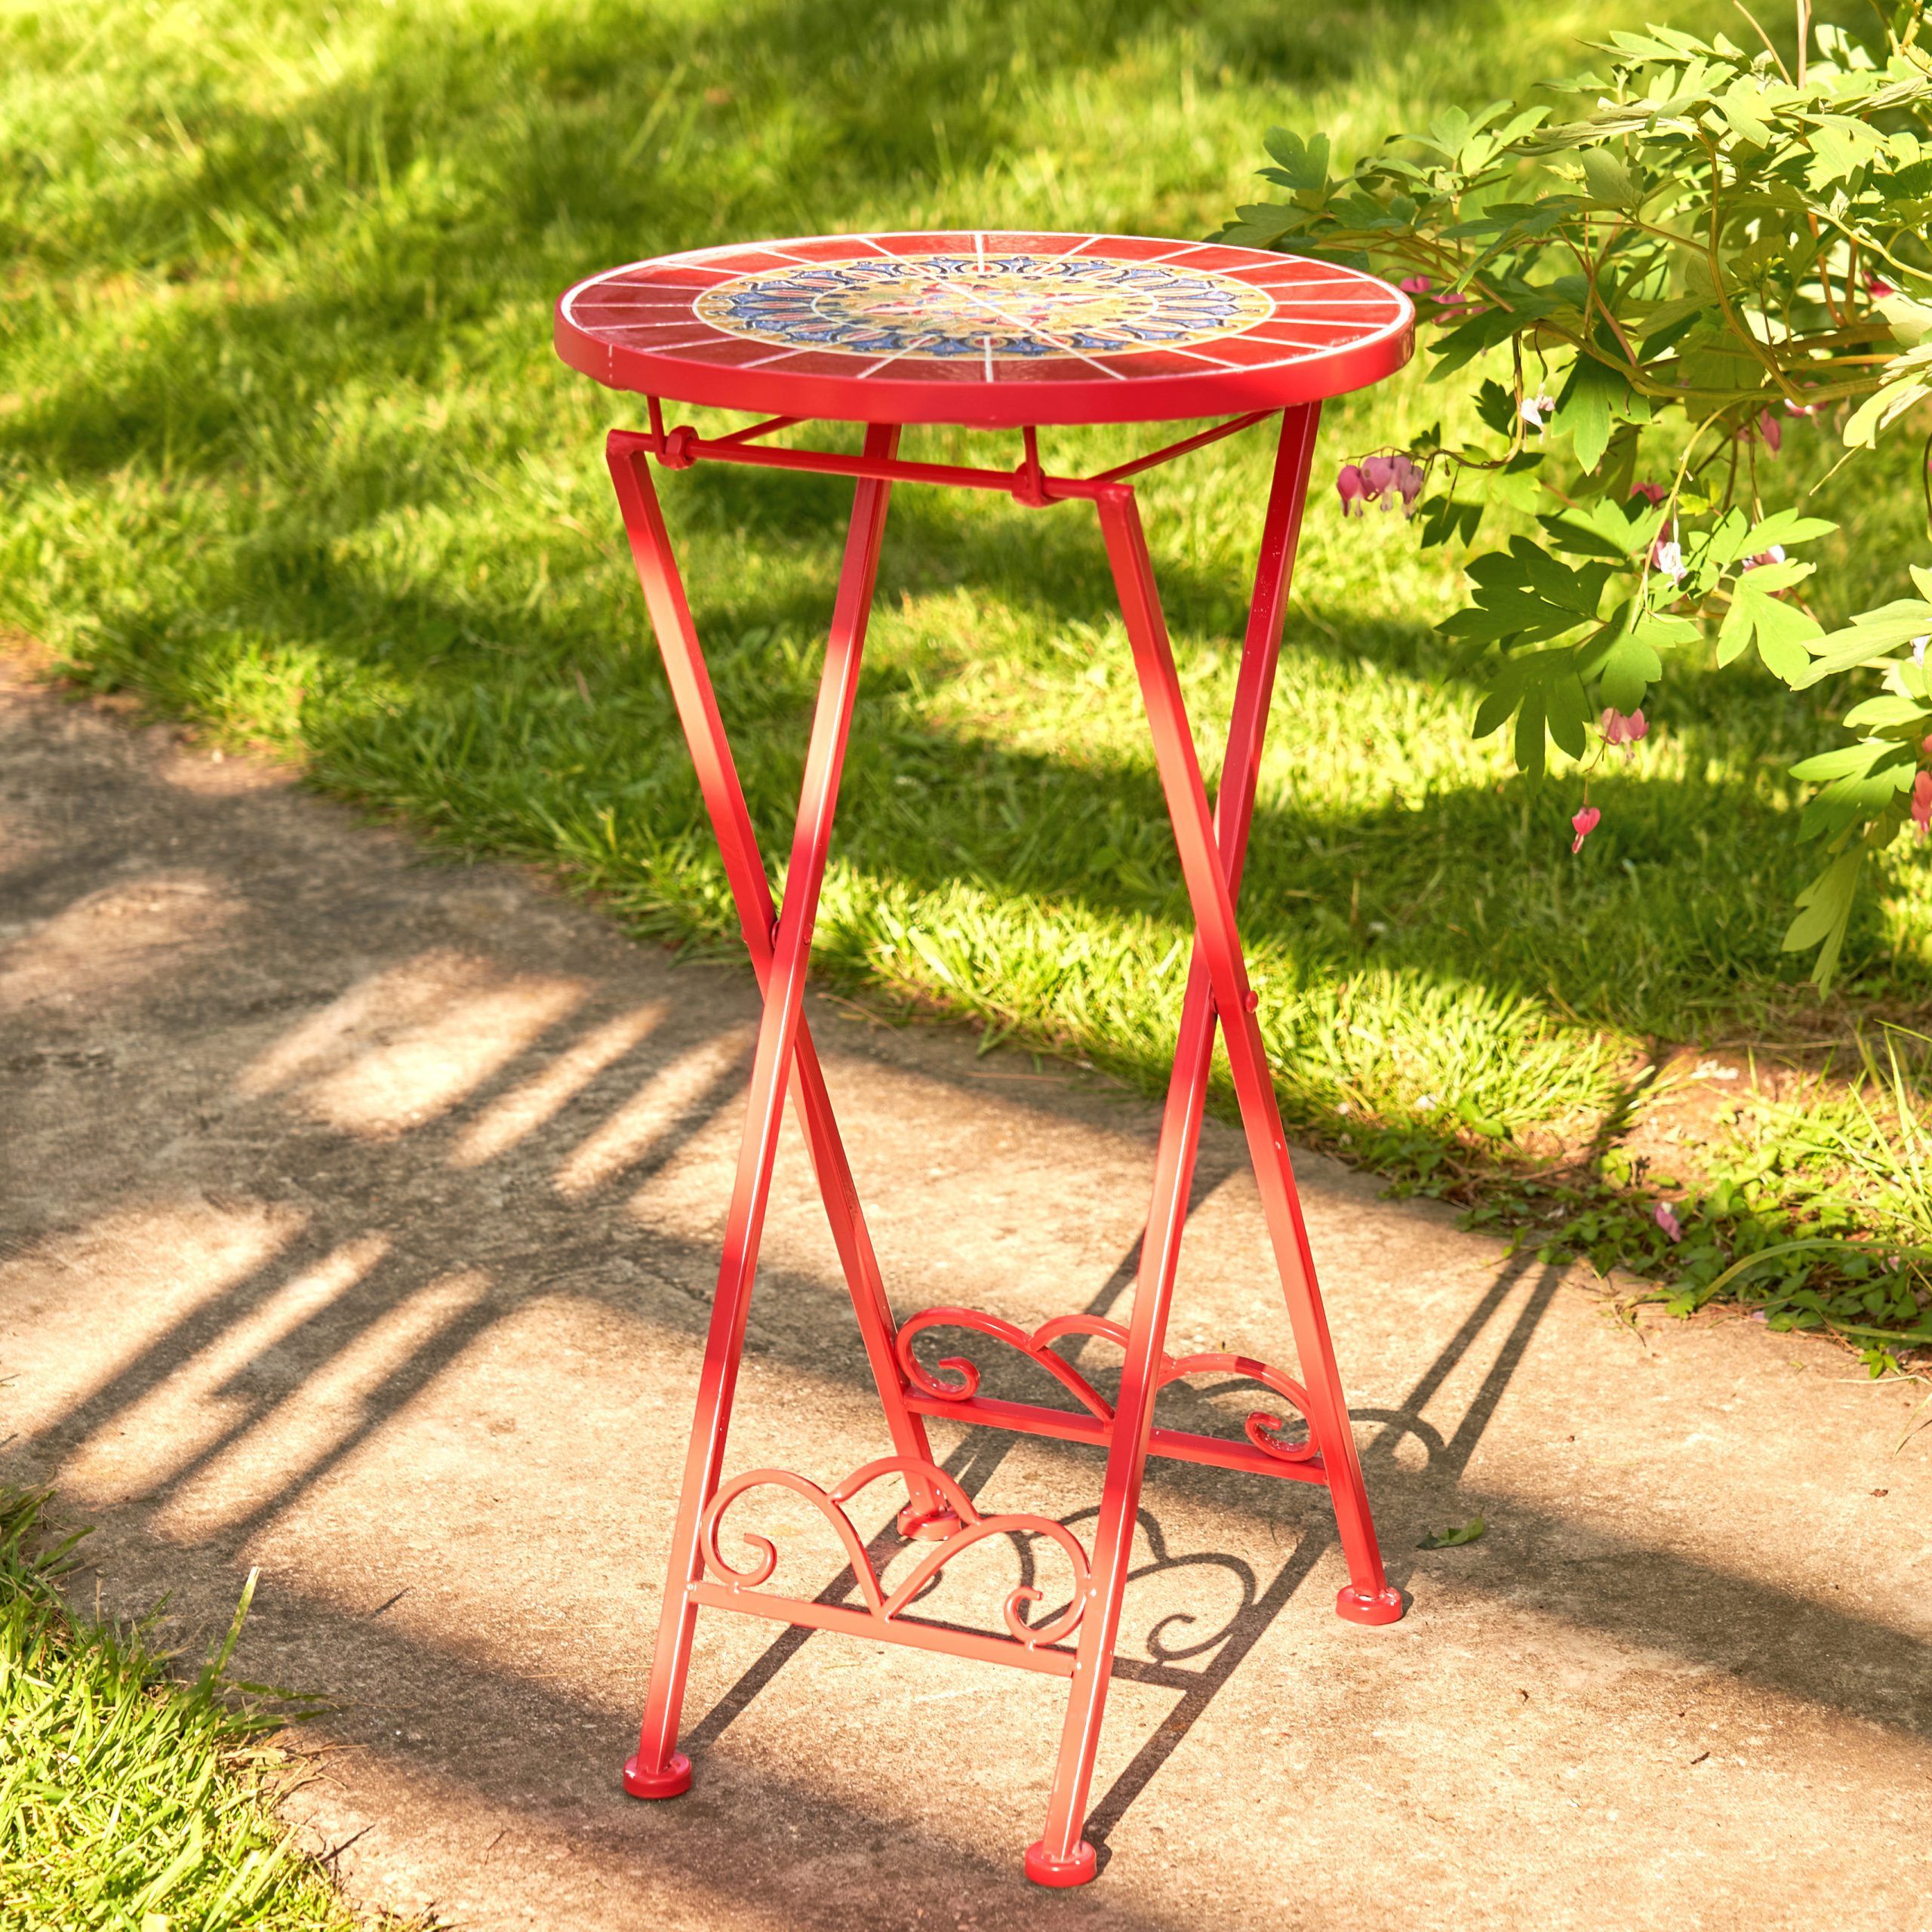 Mosaic Outdoor Accent Tables Intended For Widely Used "paris Ii" Small Mosaic Accent Table (View 14 of 15)